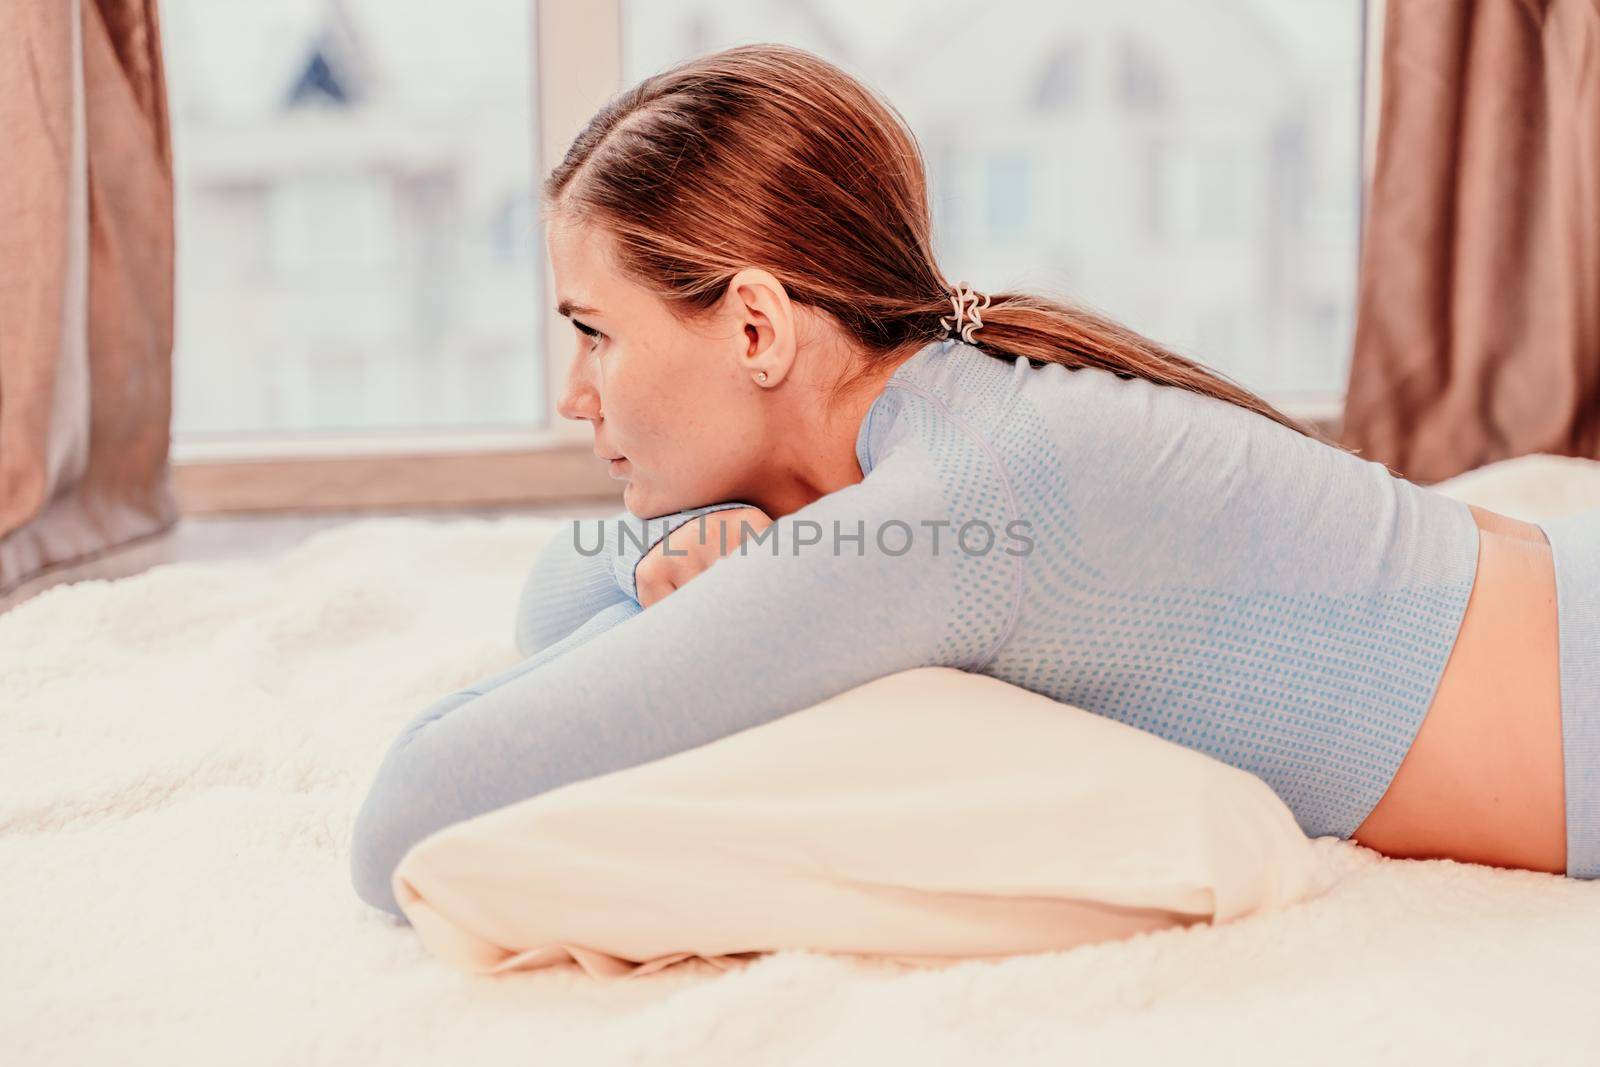 Side view portrait of relaxed woman with long hair lying on carpet at home. She is dressed in a blue tracksuit, holding a phone in her hands